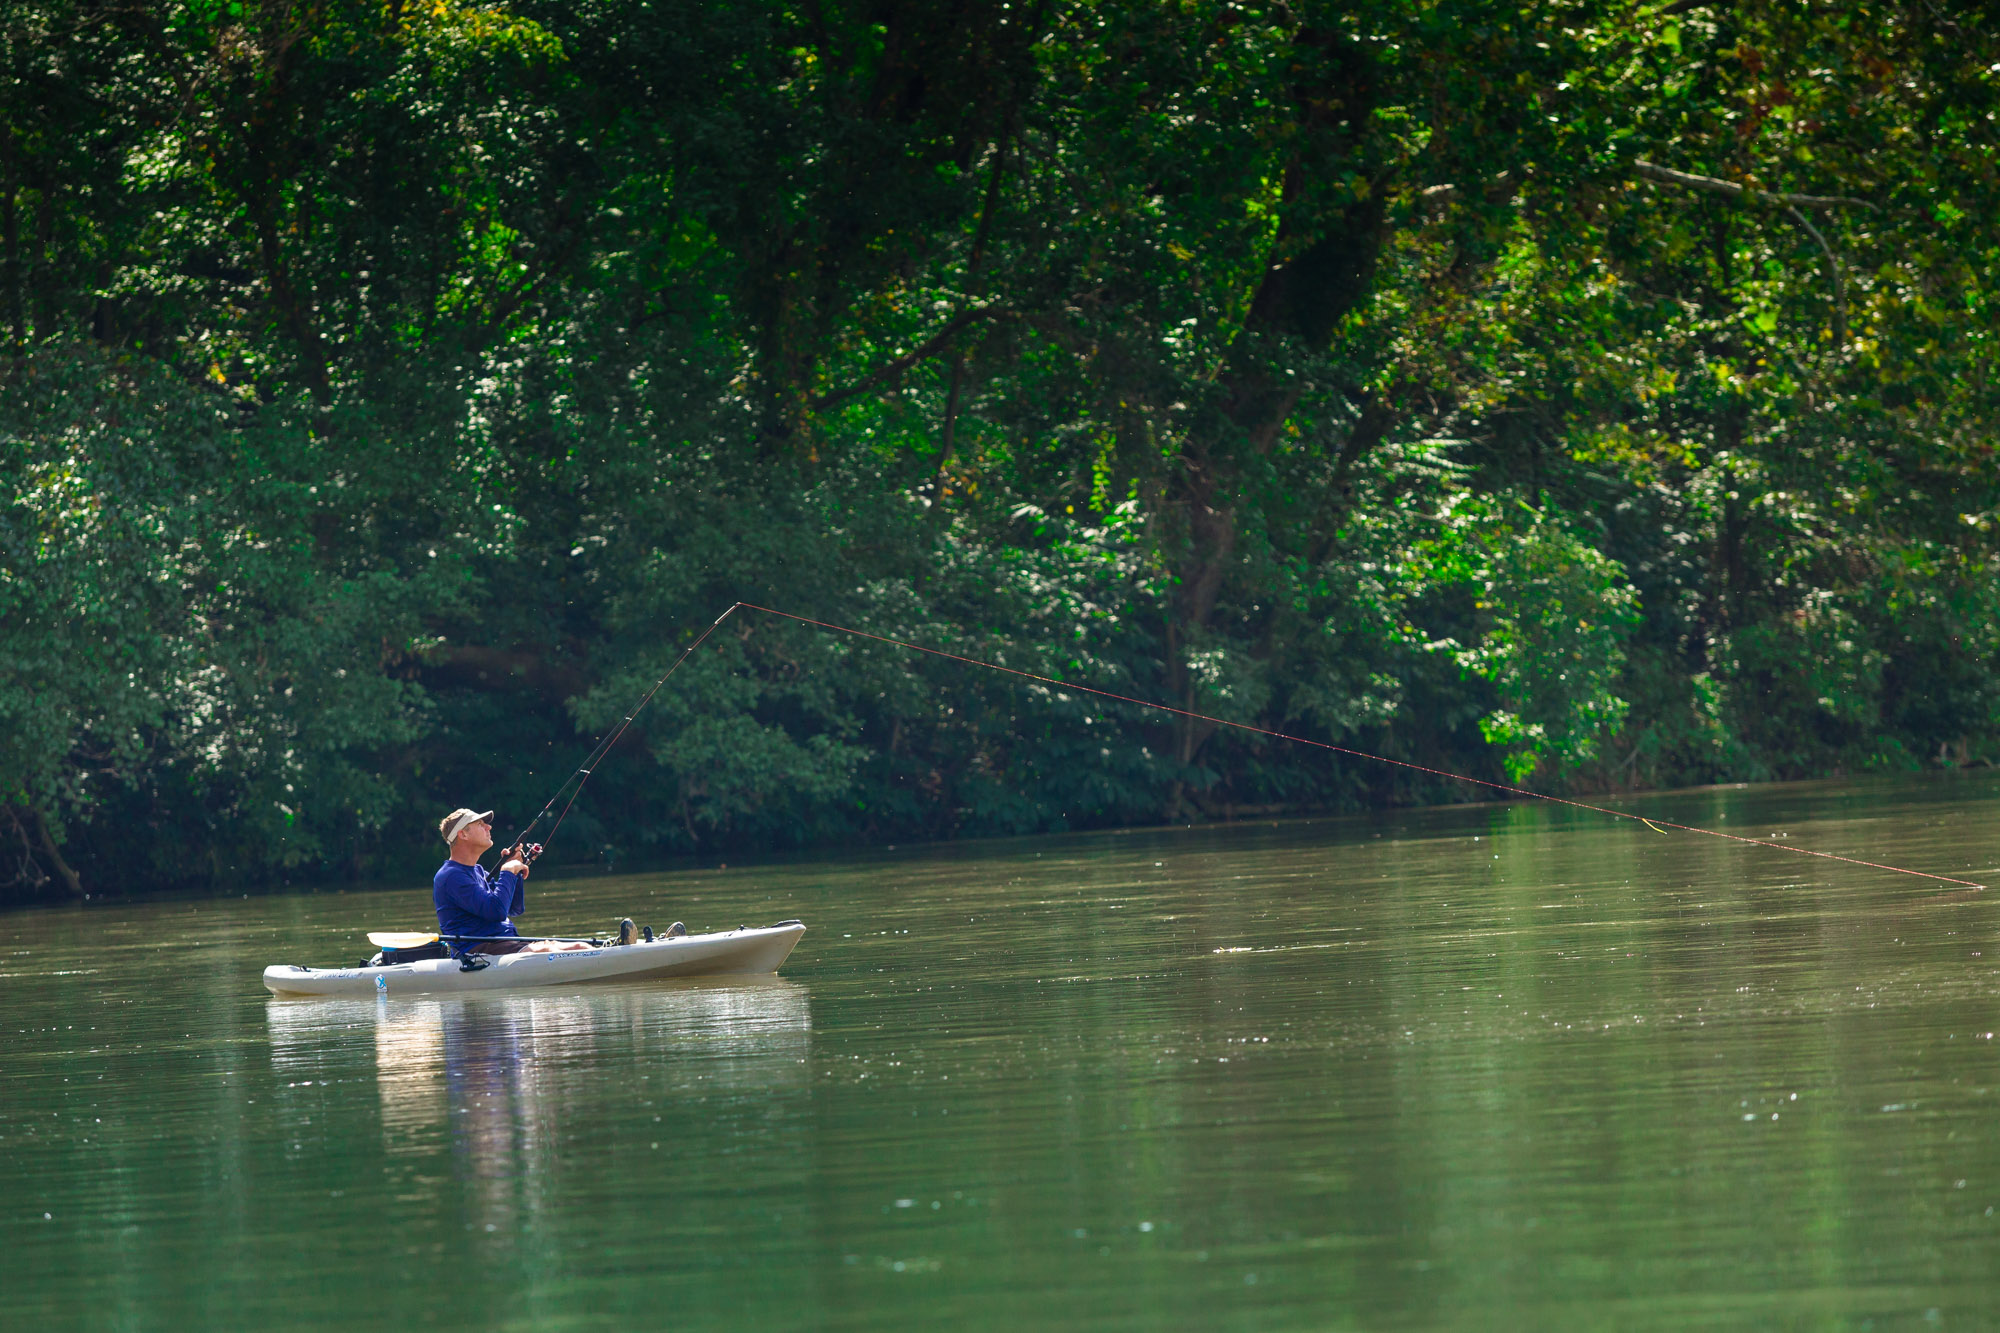 Enjoy your time on the river at Country Place Cabins in the beautiful Shenandoah Valley